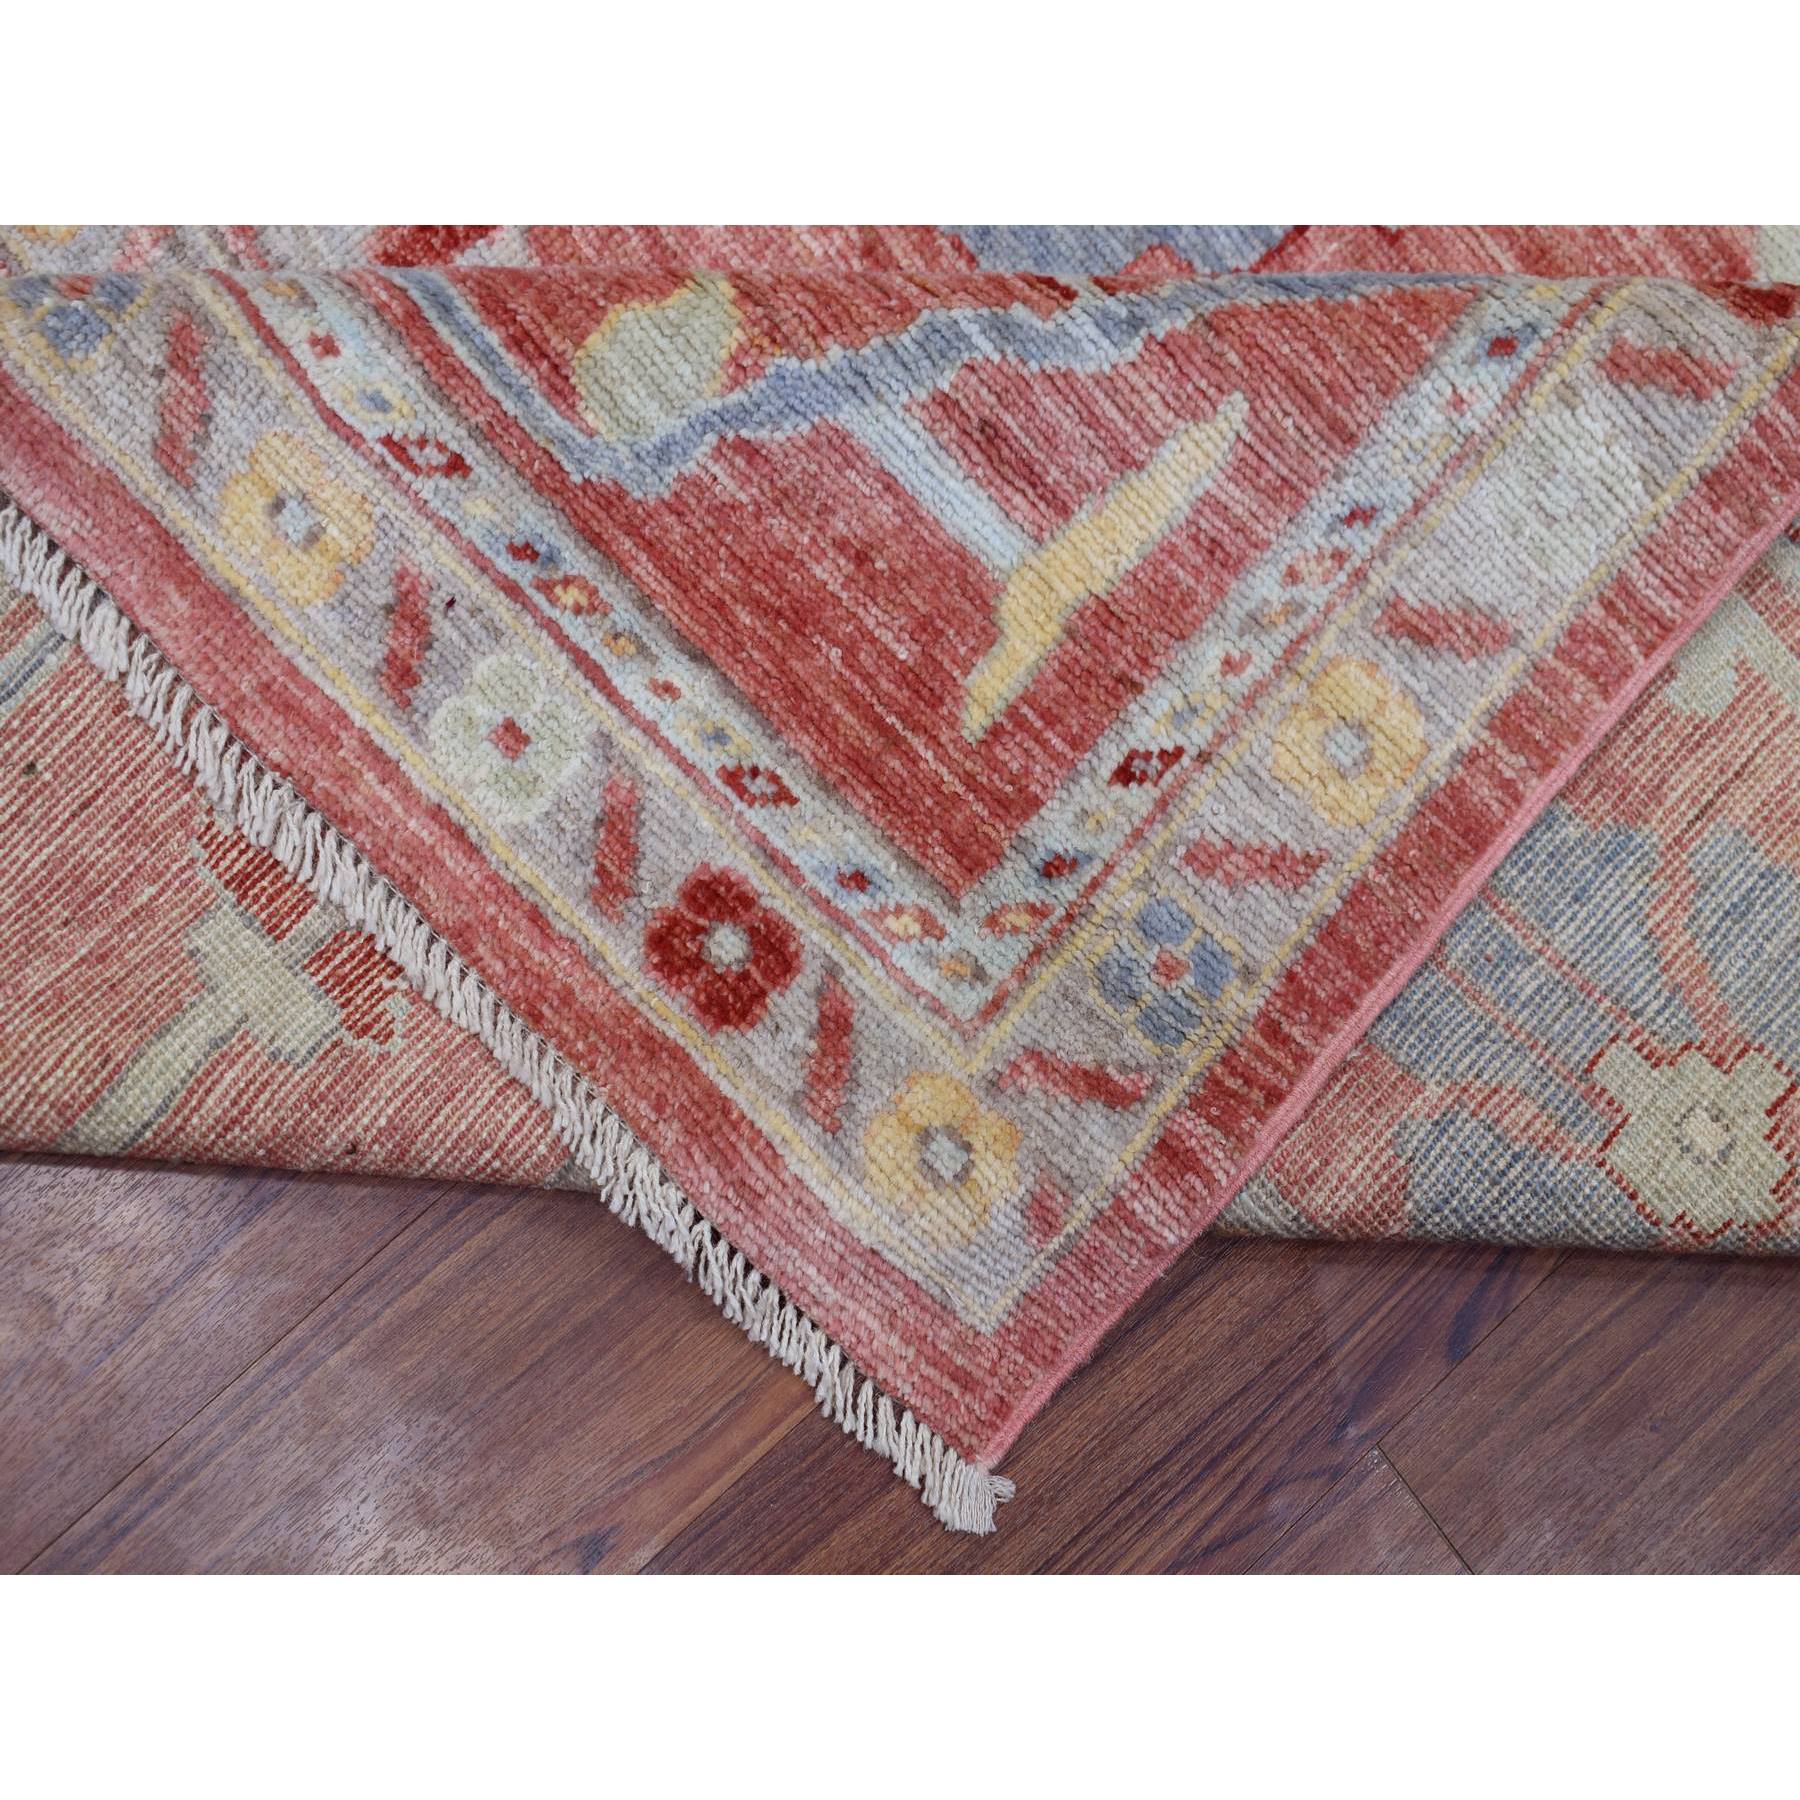 11'10"x11'10" Hand Woven, Coral Red, Afghan Angora Oushak with Floral Pattern, Pliable Wool, Oriental, Square, Rug 